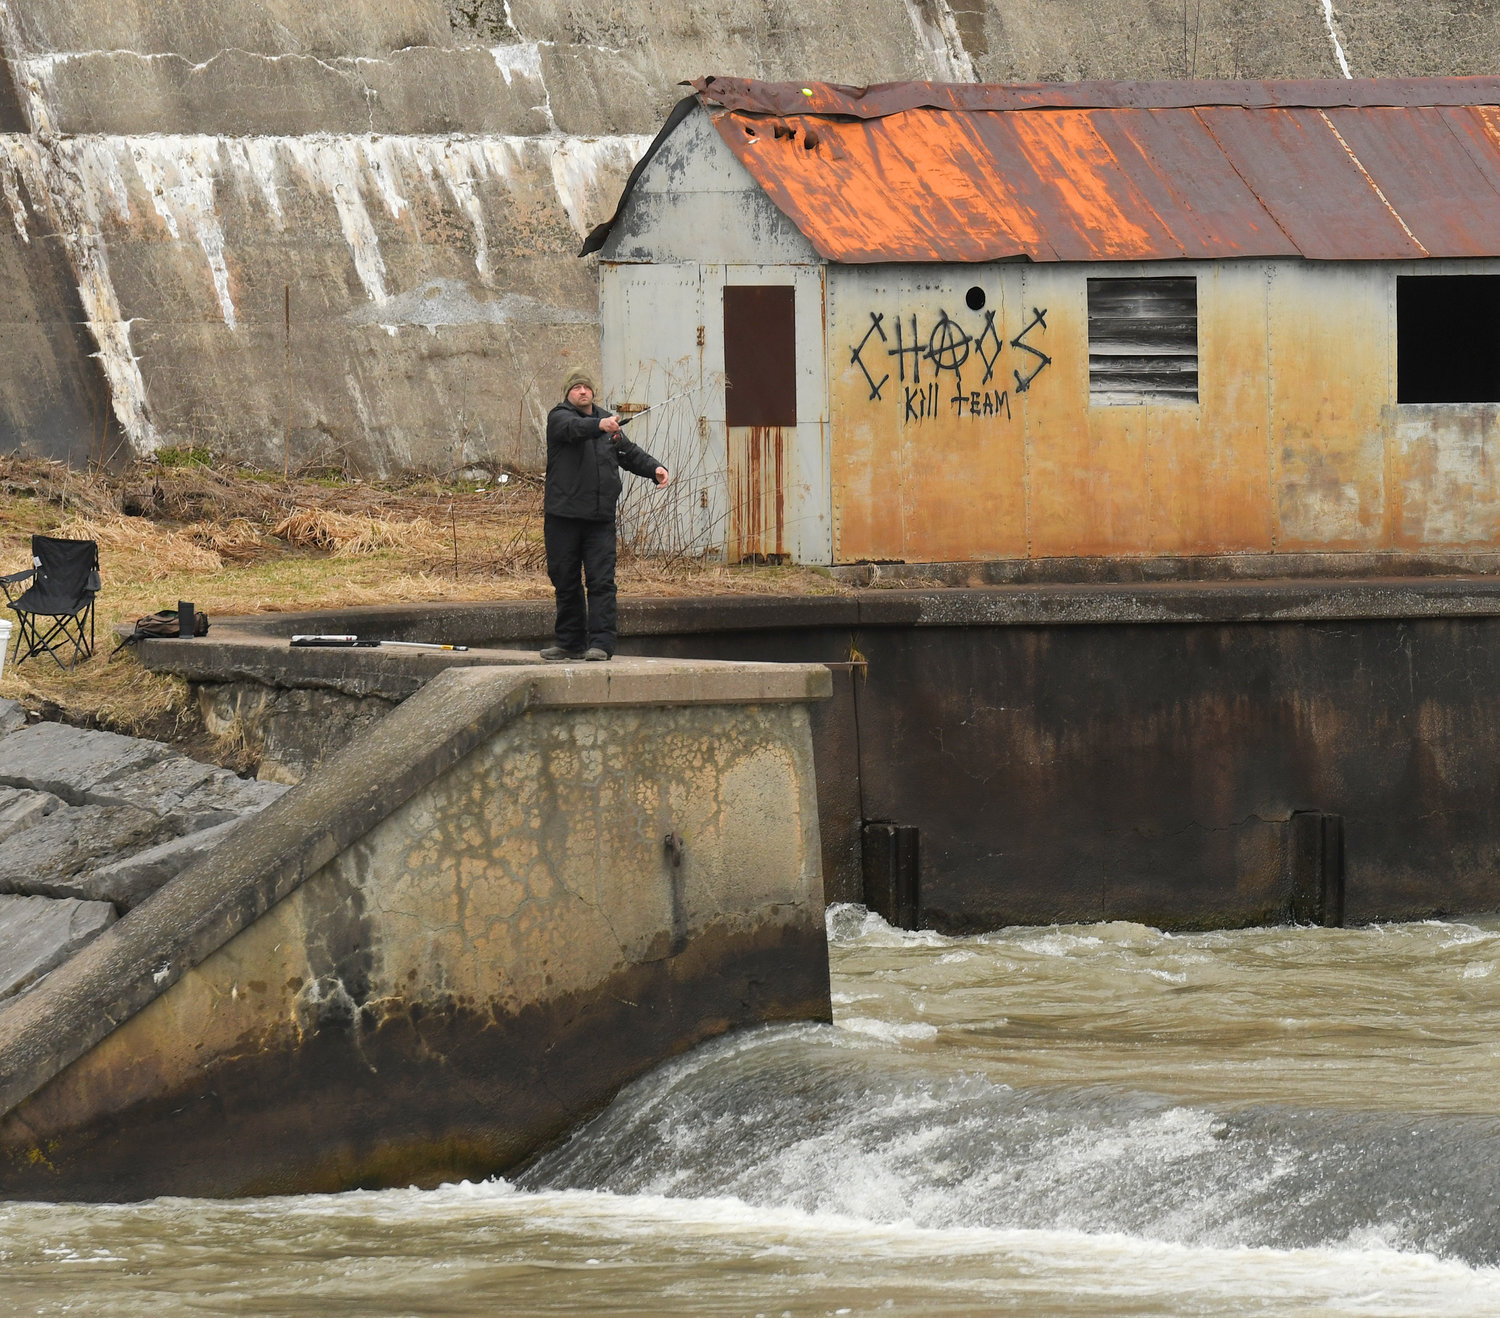 A fisherman just below Delta Dam on opening day of trout season.